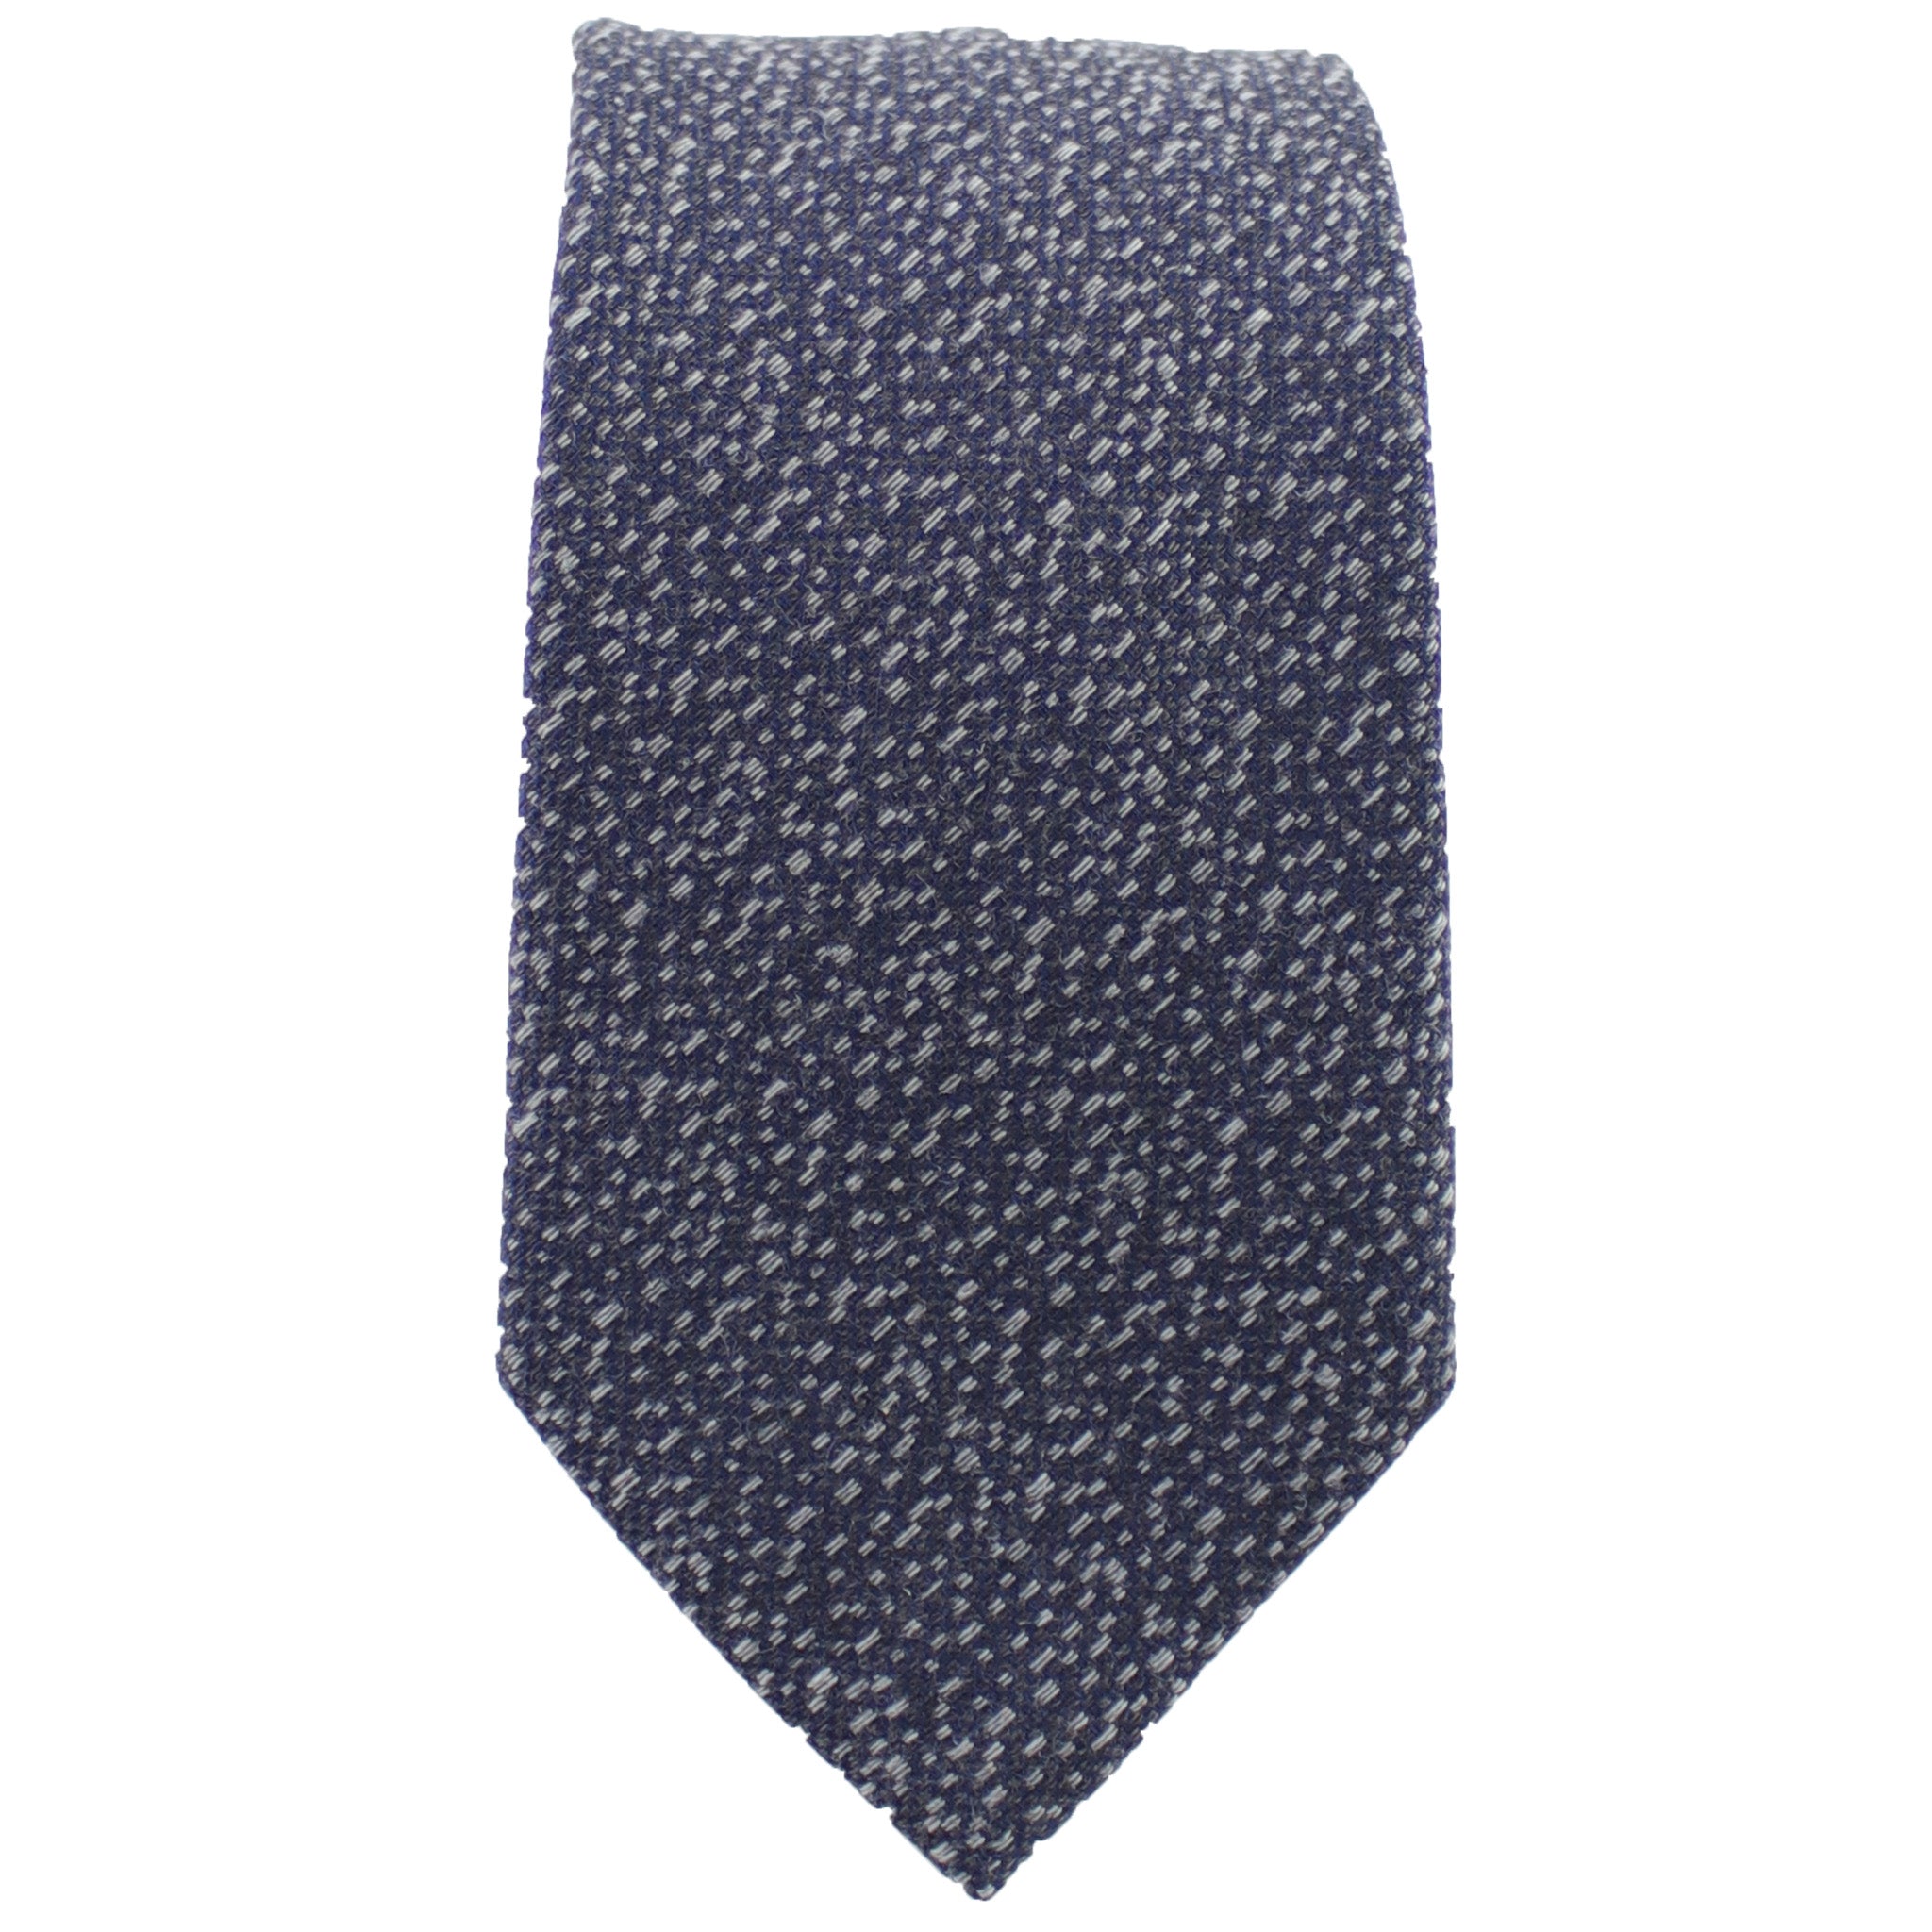 Charcoal & Silver Heather Tie from DIBI